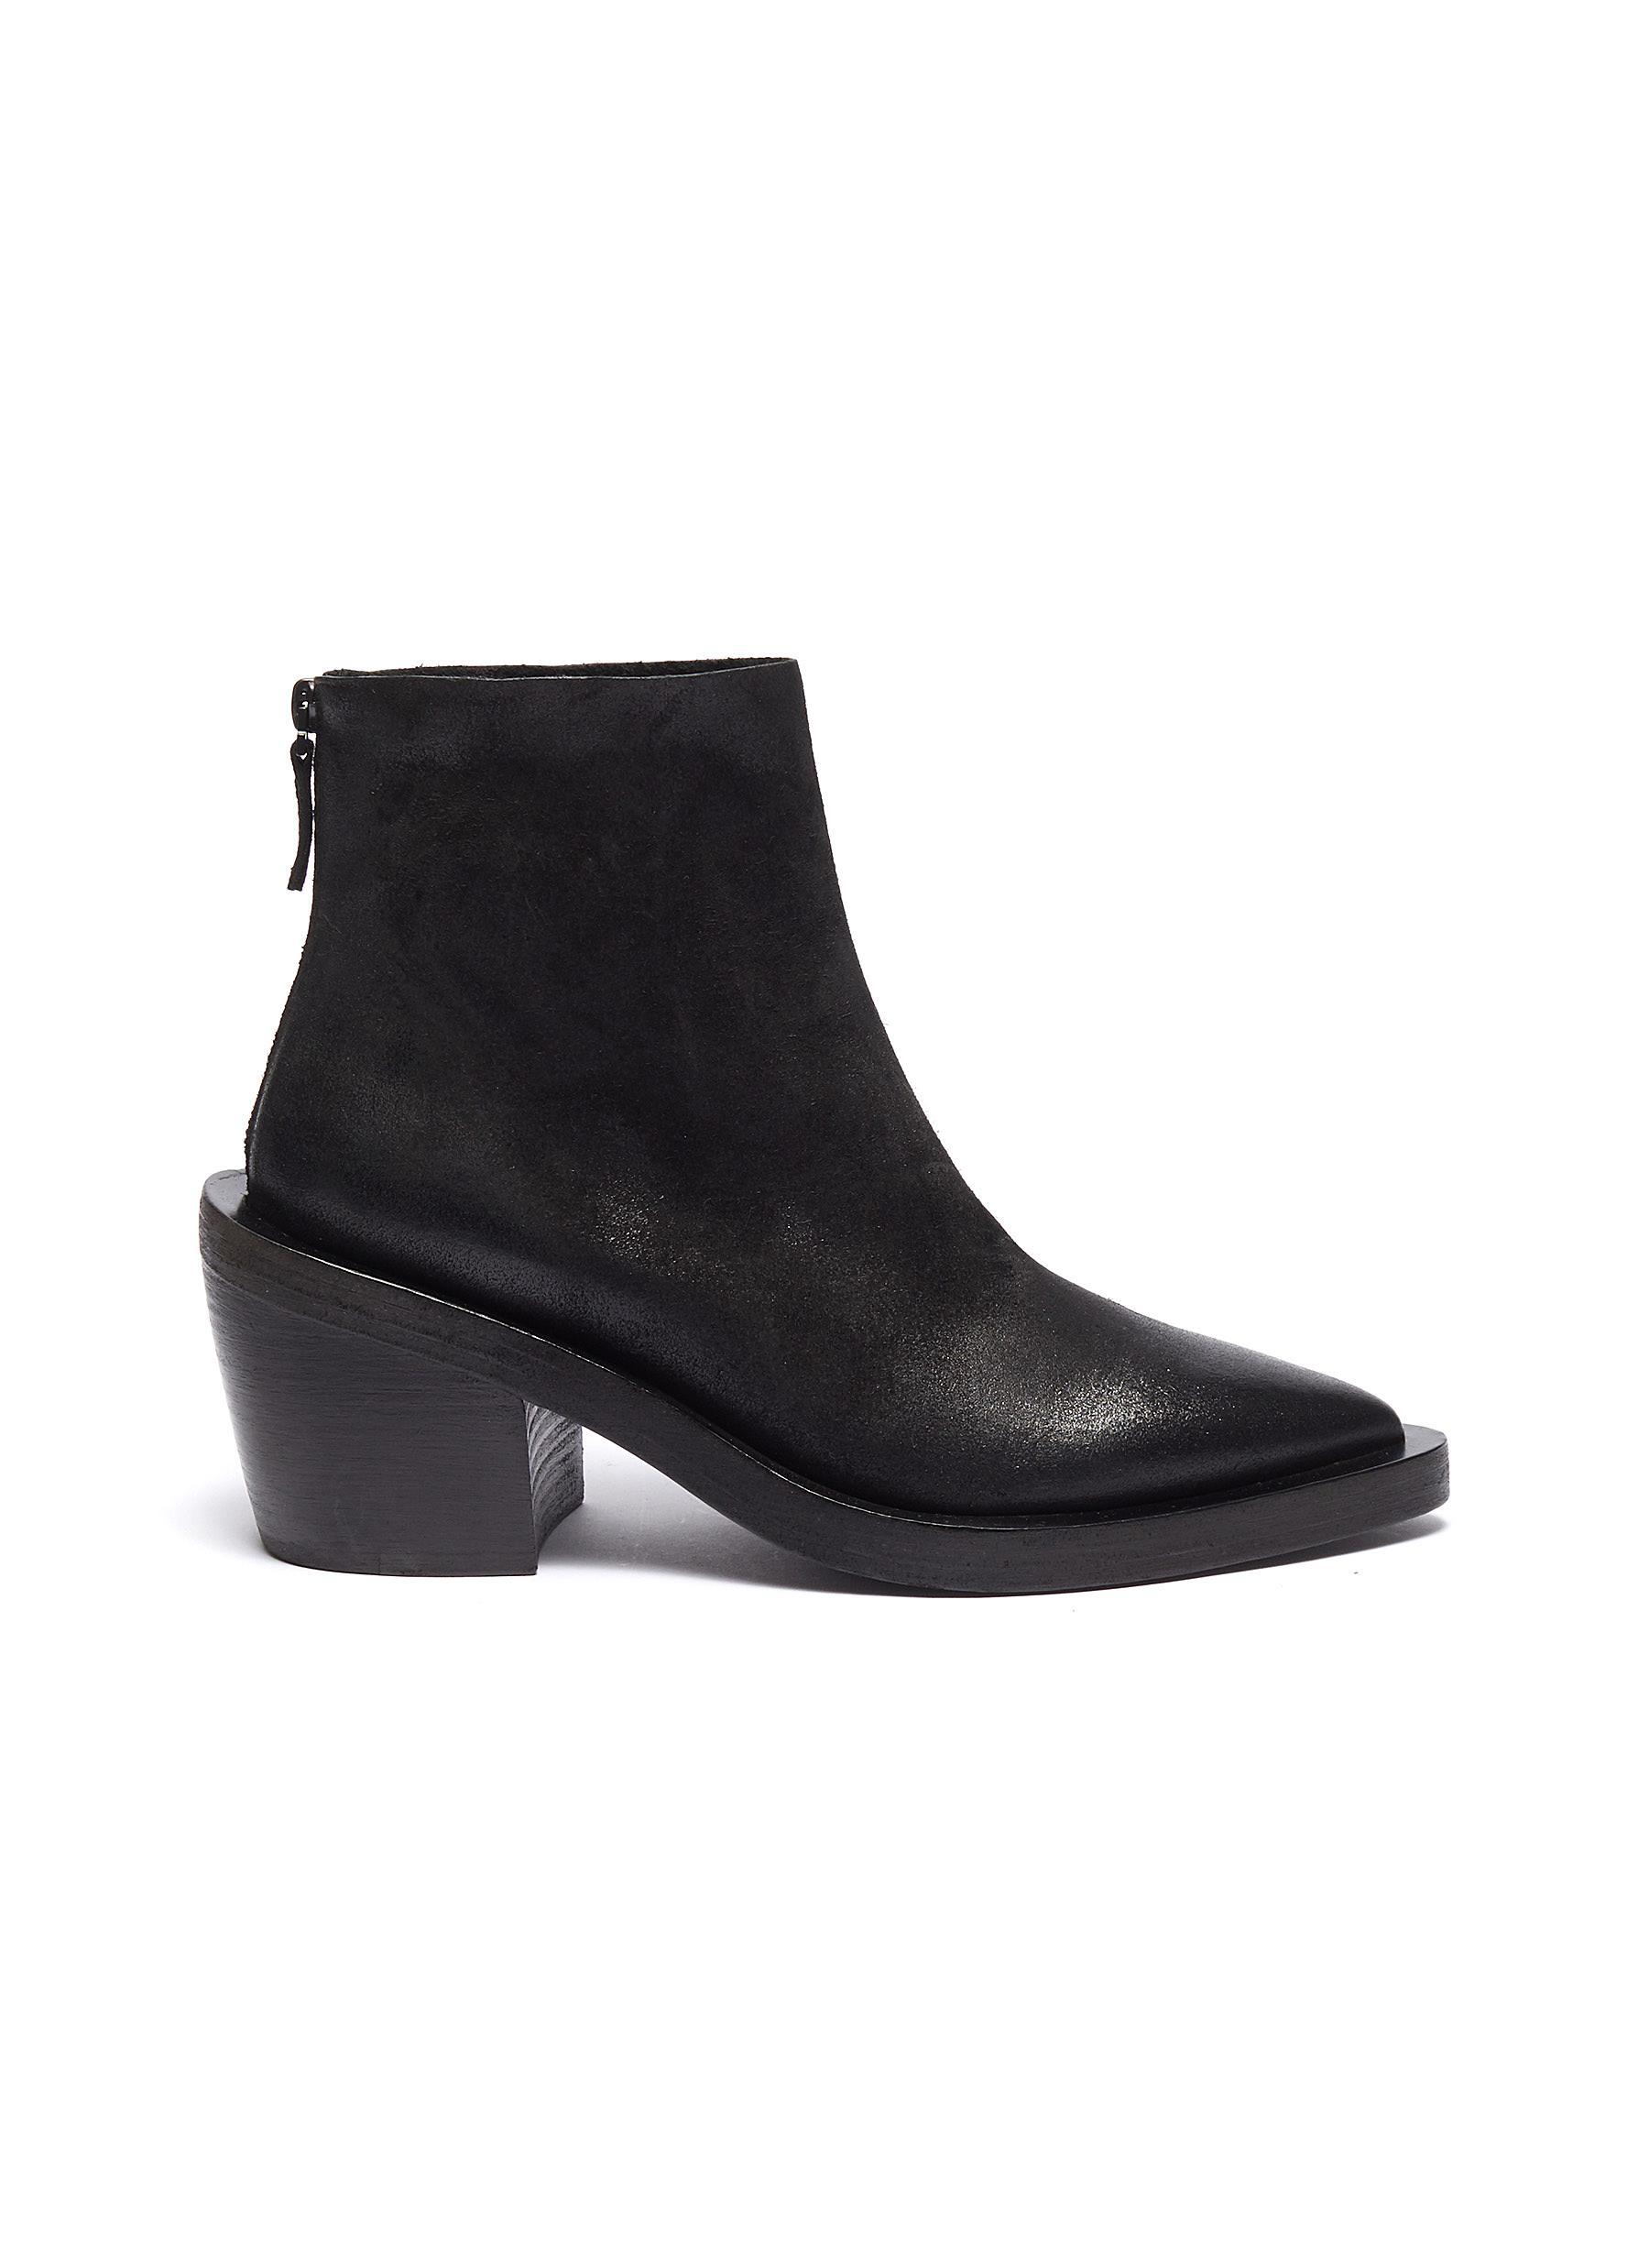 Marsèll 'coneros' Distressed Leather Ankle Boots in Black - Lyst